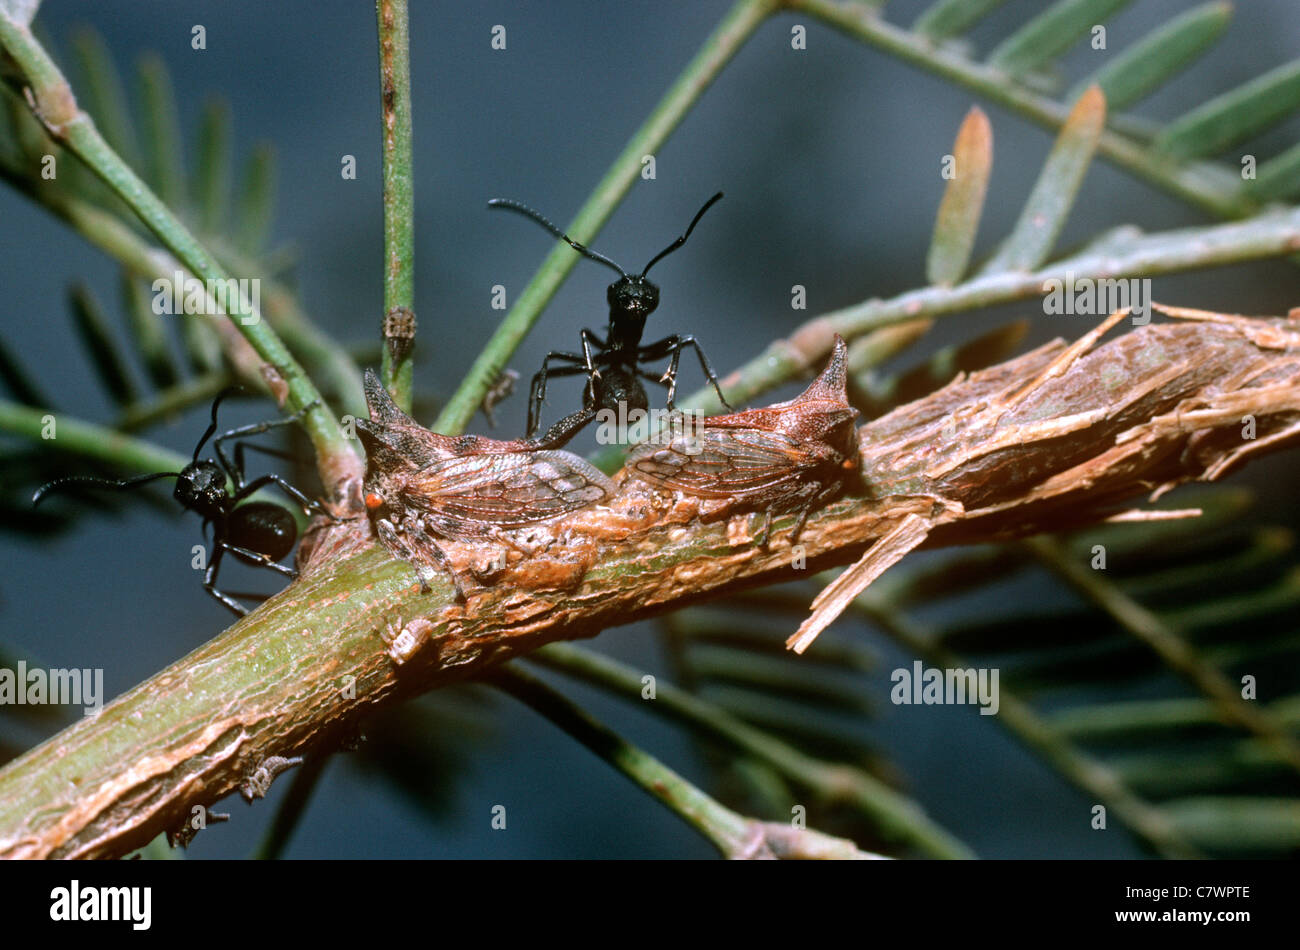 Treehopper (Oxyrhachis versicolor) females guarding egg-masses while being tended by ants, Israel Stock Photo